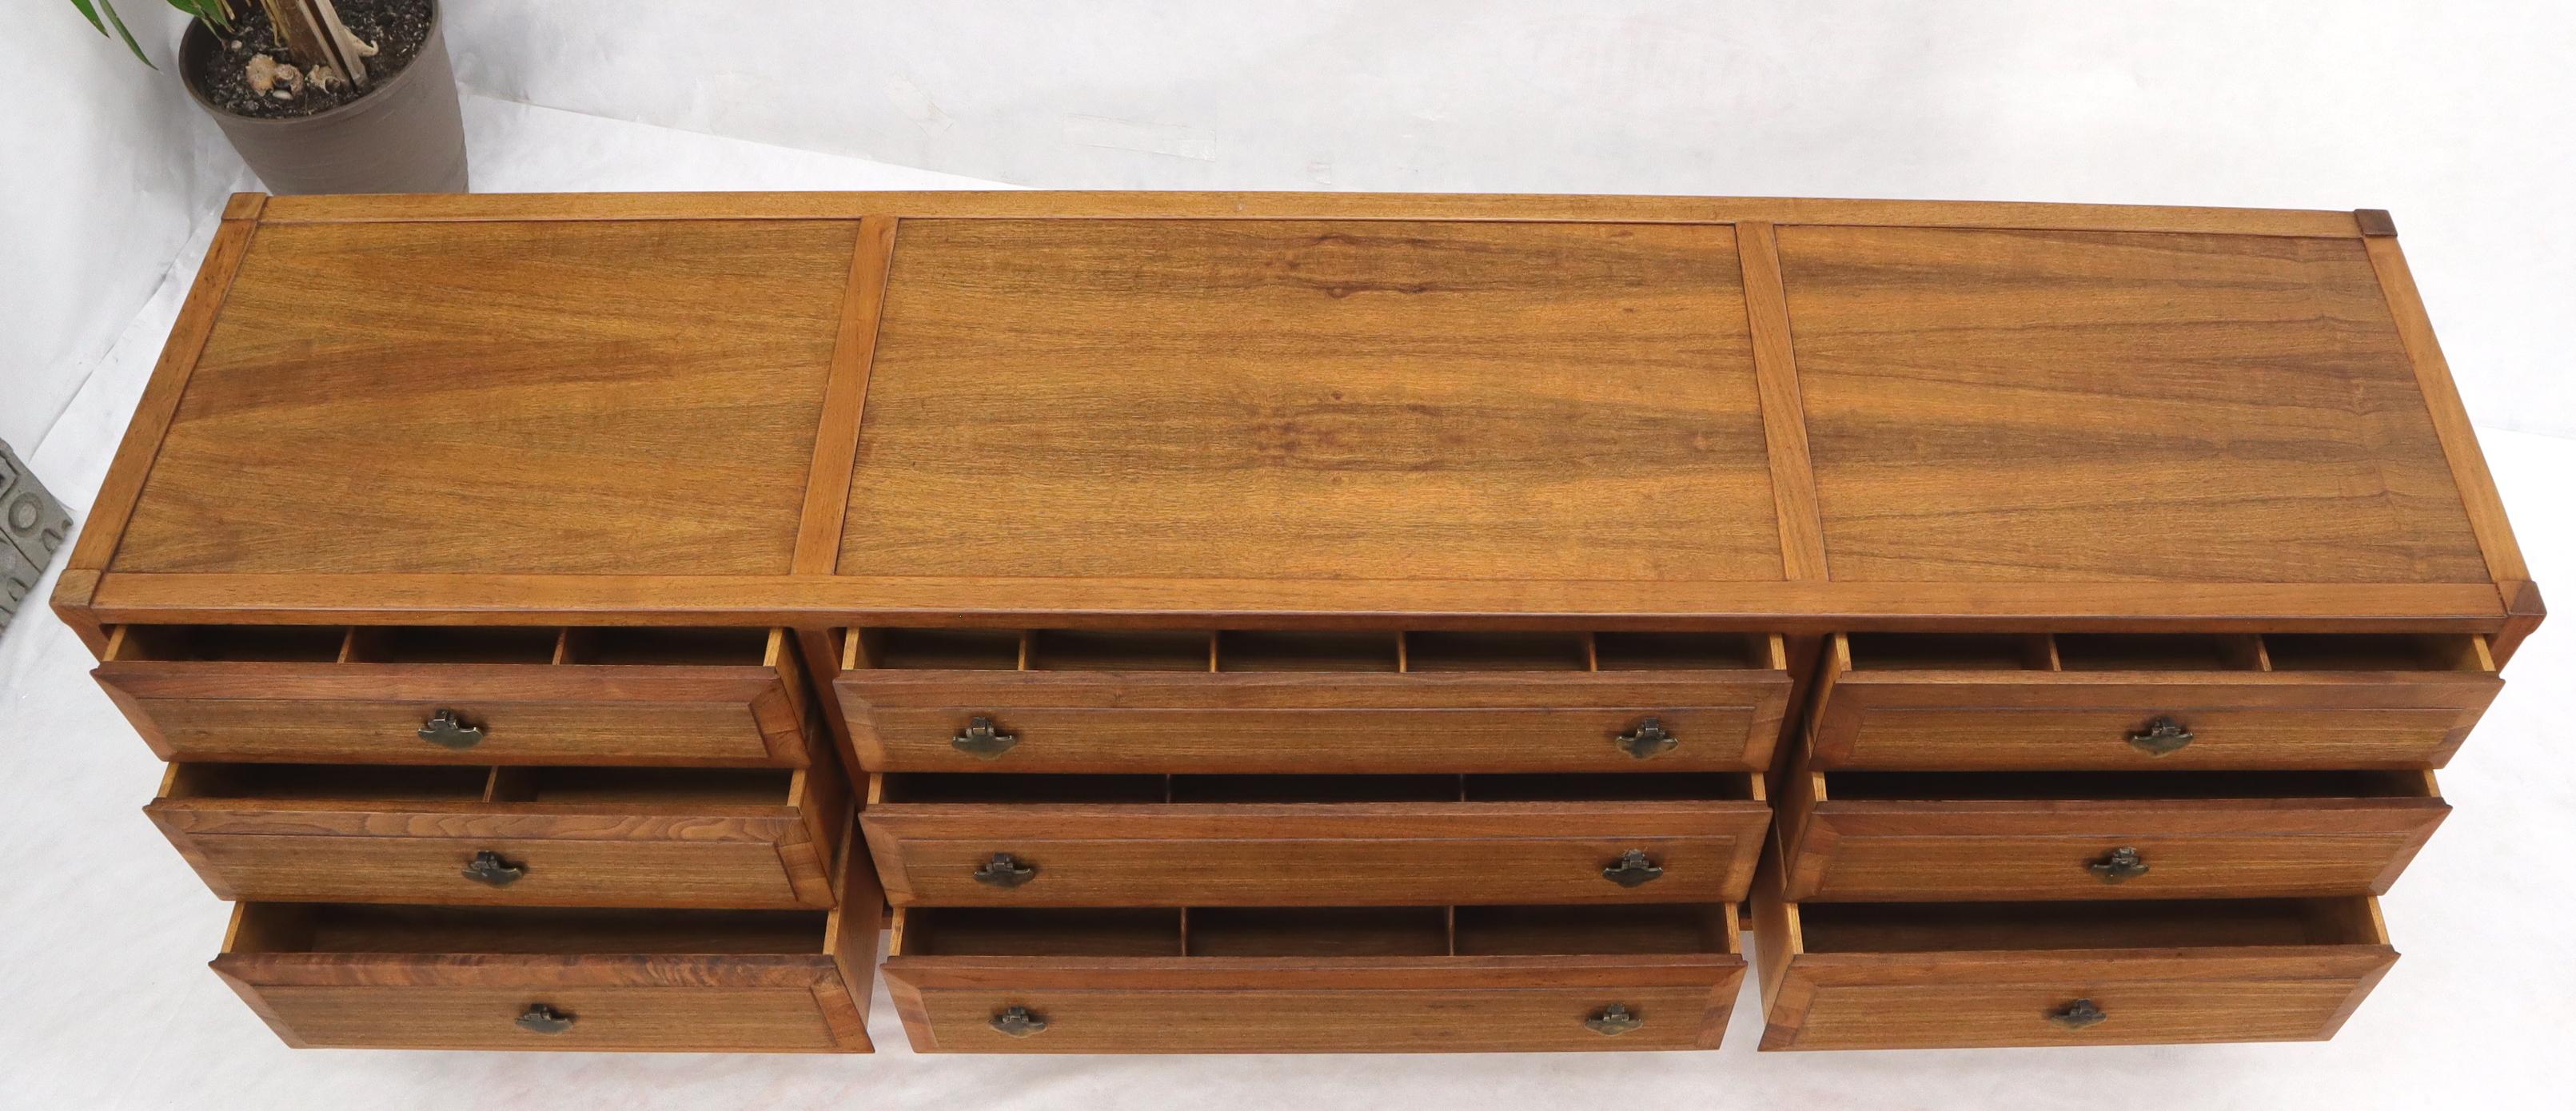 Long 9 Beveled Front Drawers Dresser Credenza by Widdicomb In Good Condition For Sale In Rockaway, NJ